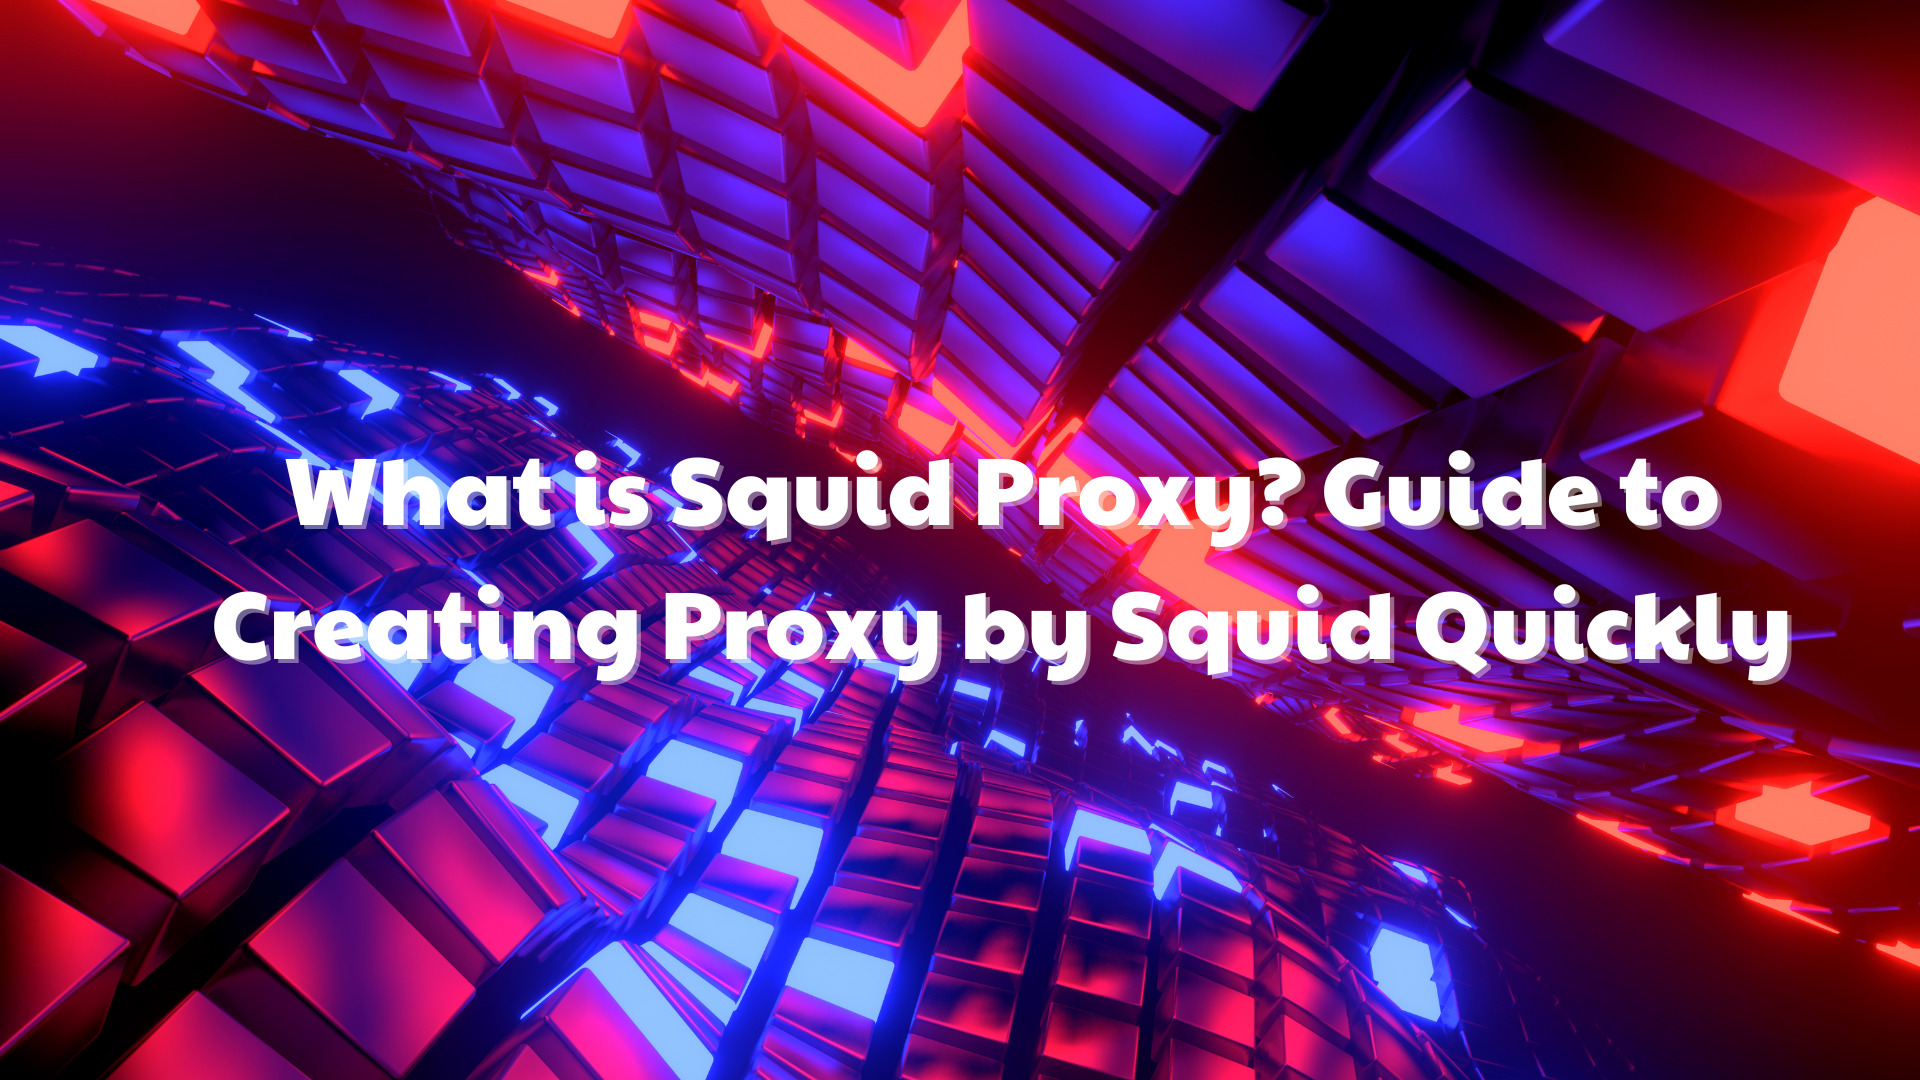 What is Squid Proxy? Guide to Creating Proxy by Squid Quickly